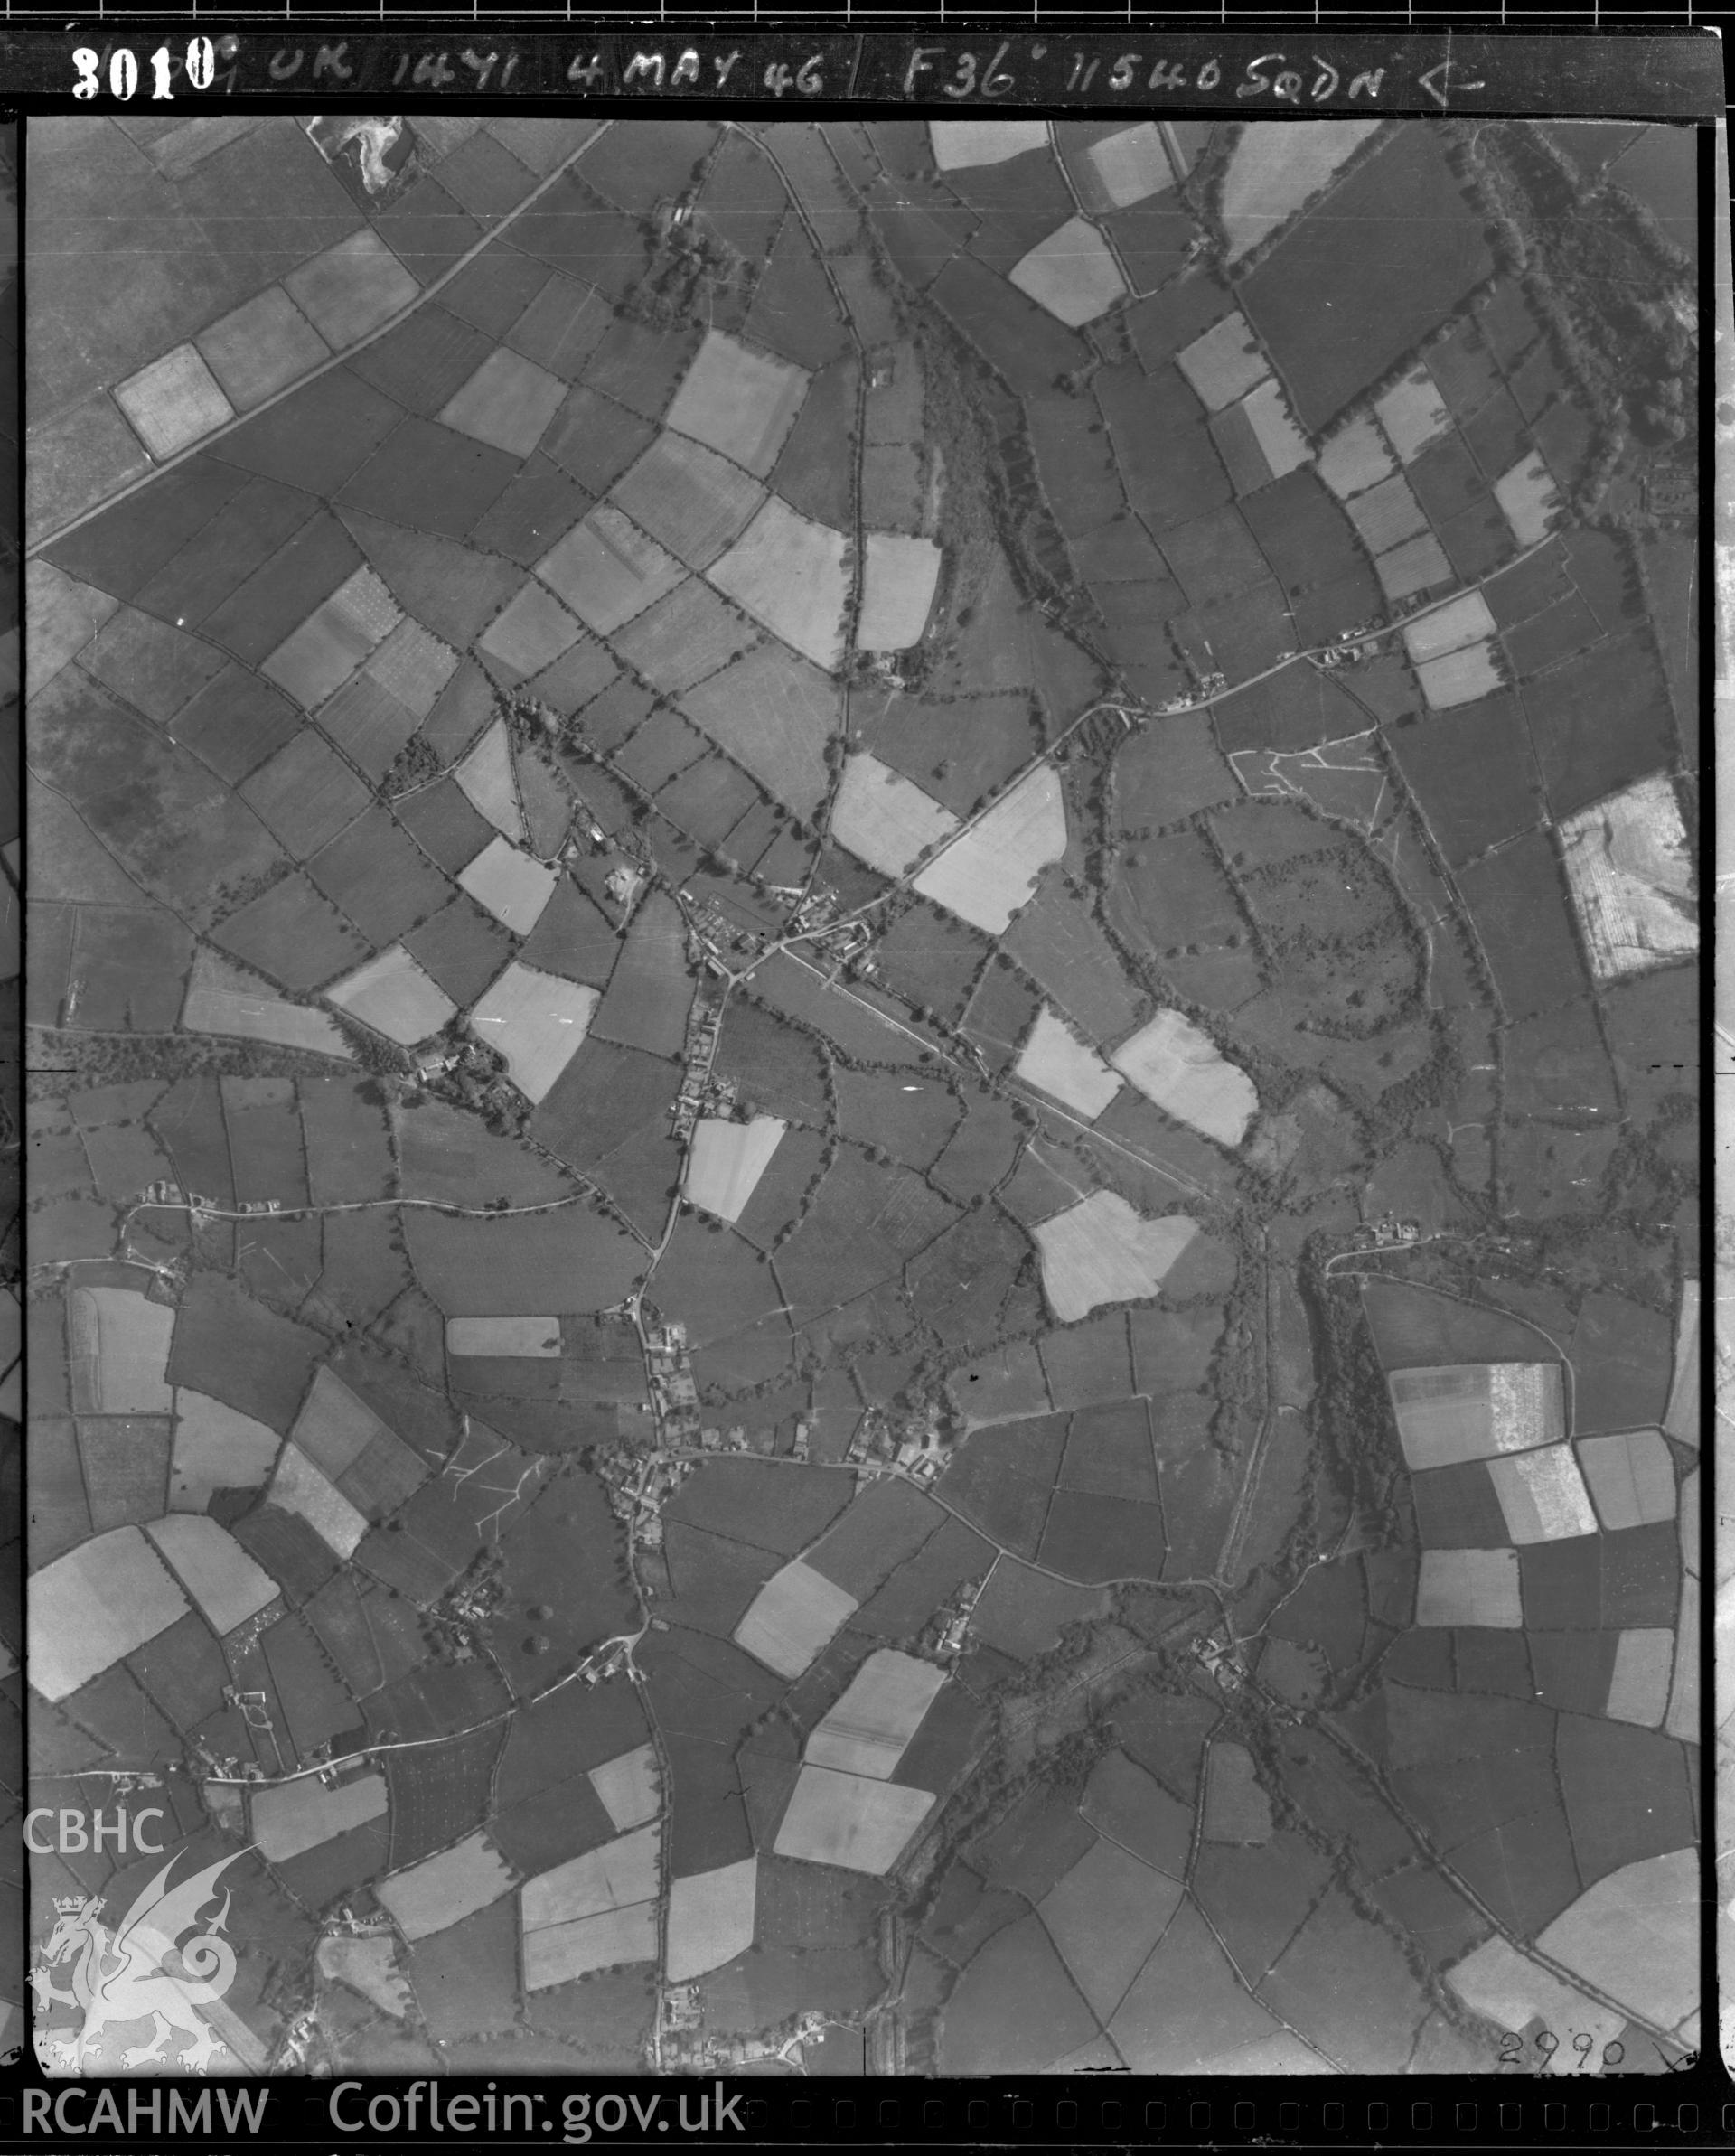 Digital copy of a Royal Air Force aerial view of the Rhydlewis area, dated 4th May 1946.